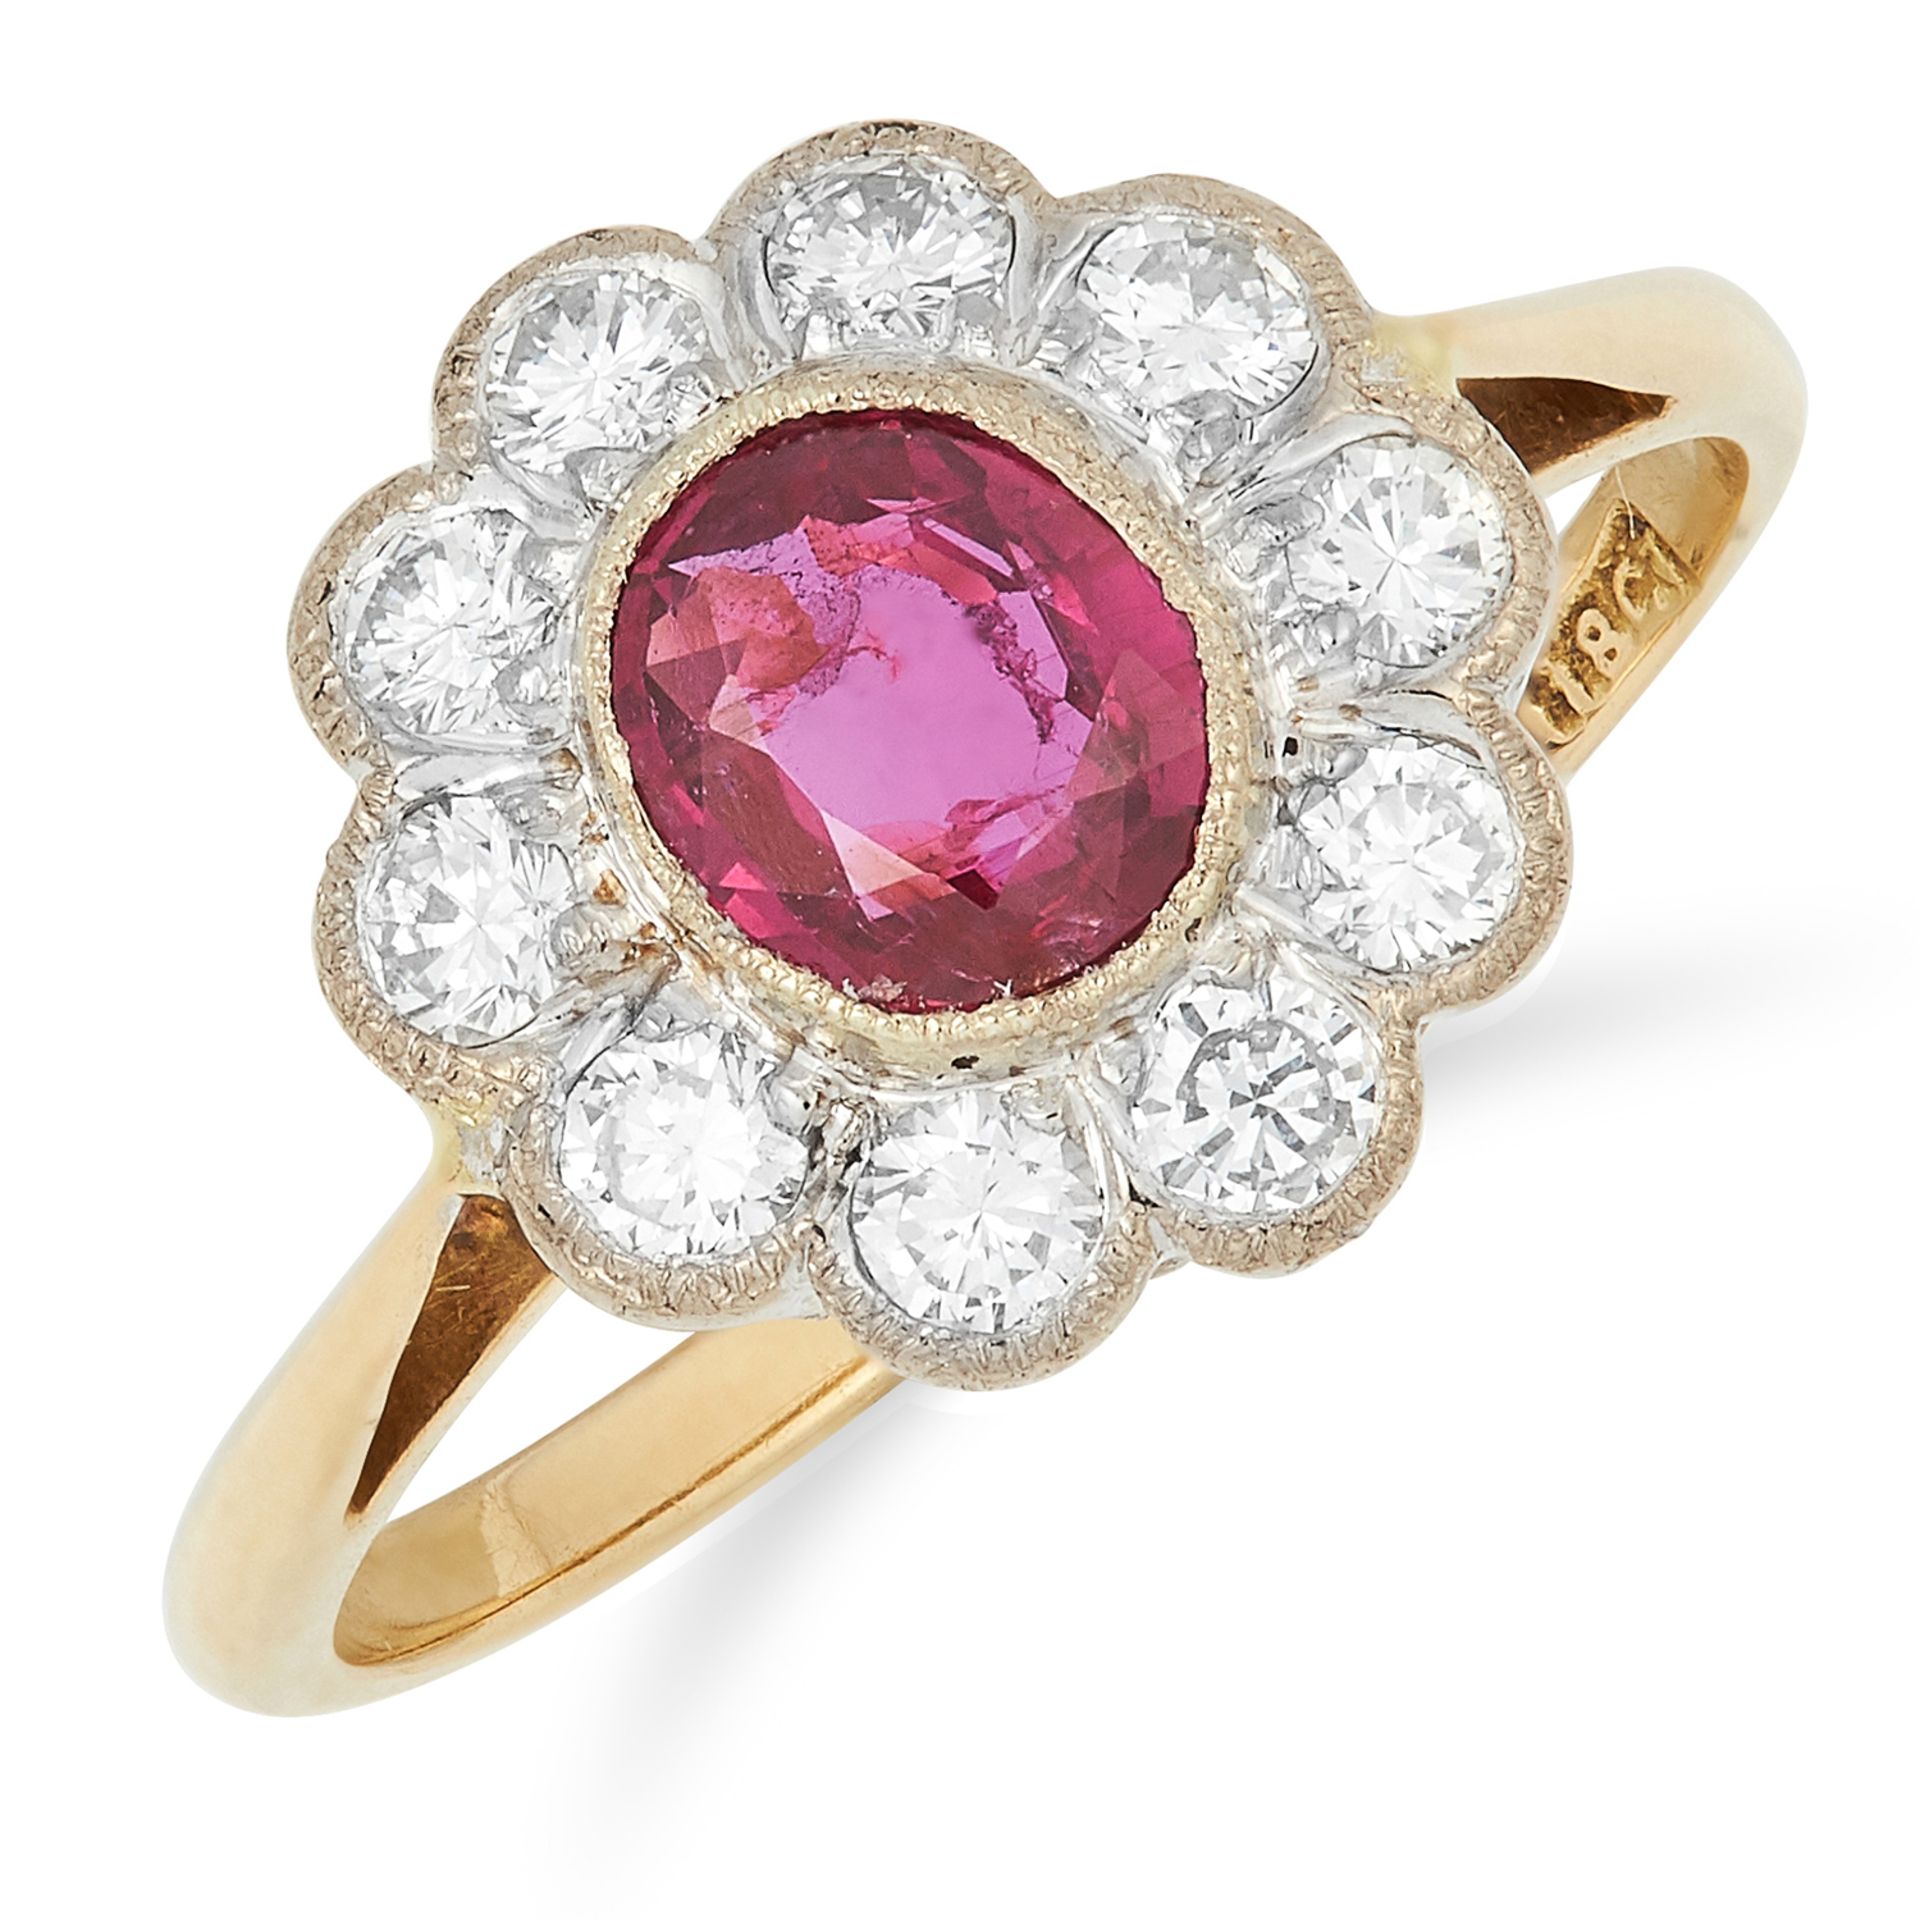 RUBY AND DIAMOND CLUSTER RING set with an oval cut ruby of approximately 0.68 carats, possibly Burma